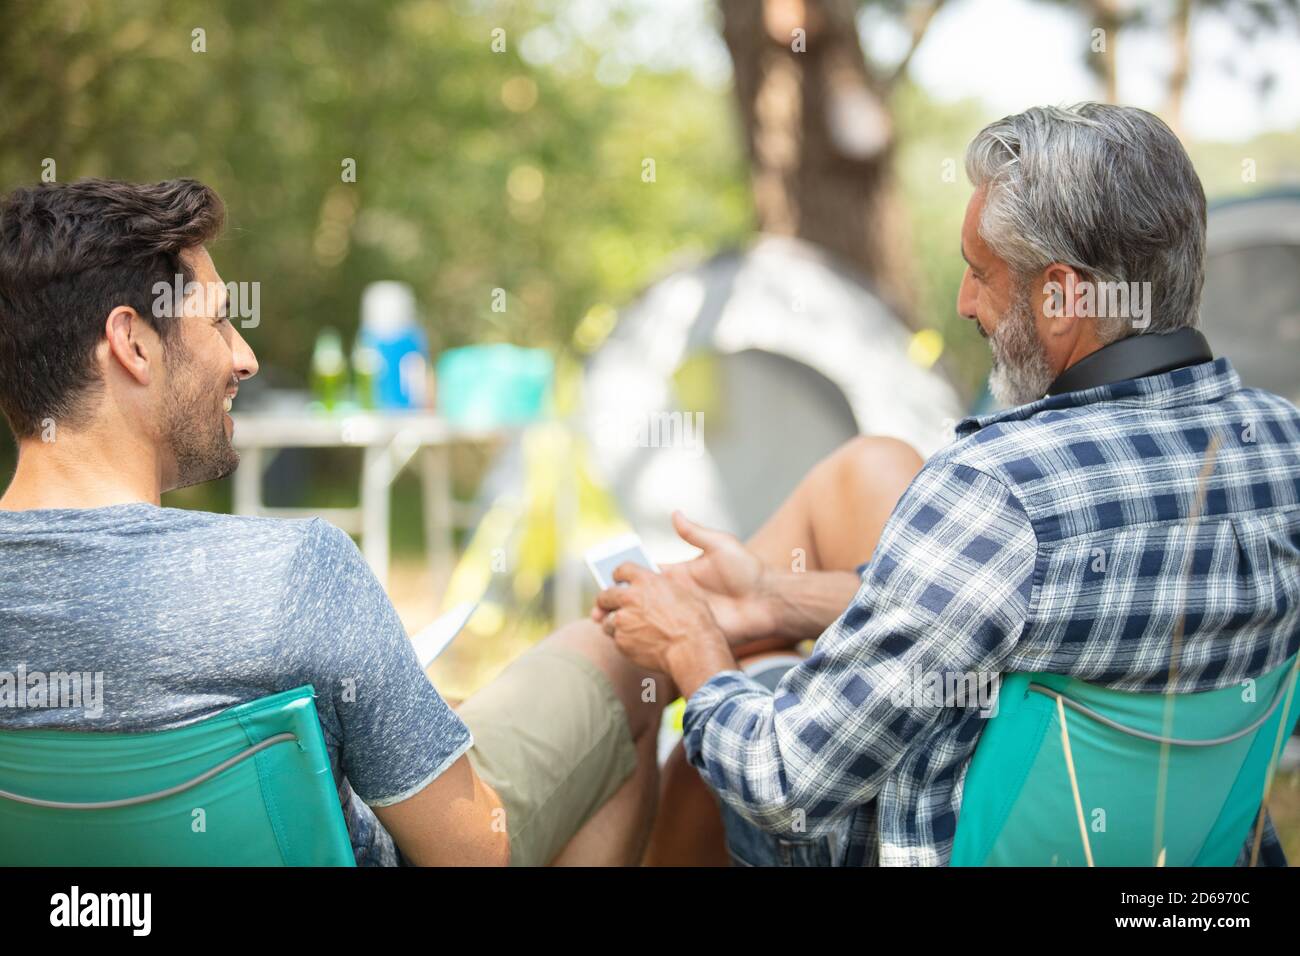 two men sitting on soft chair at camp site Stock Photo